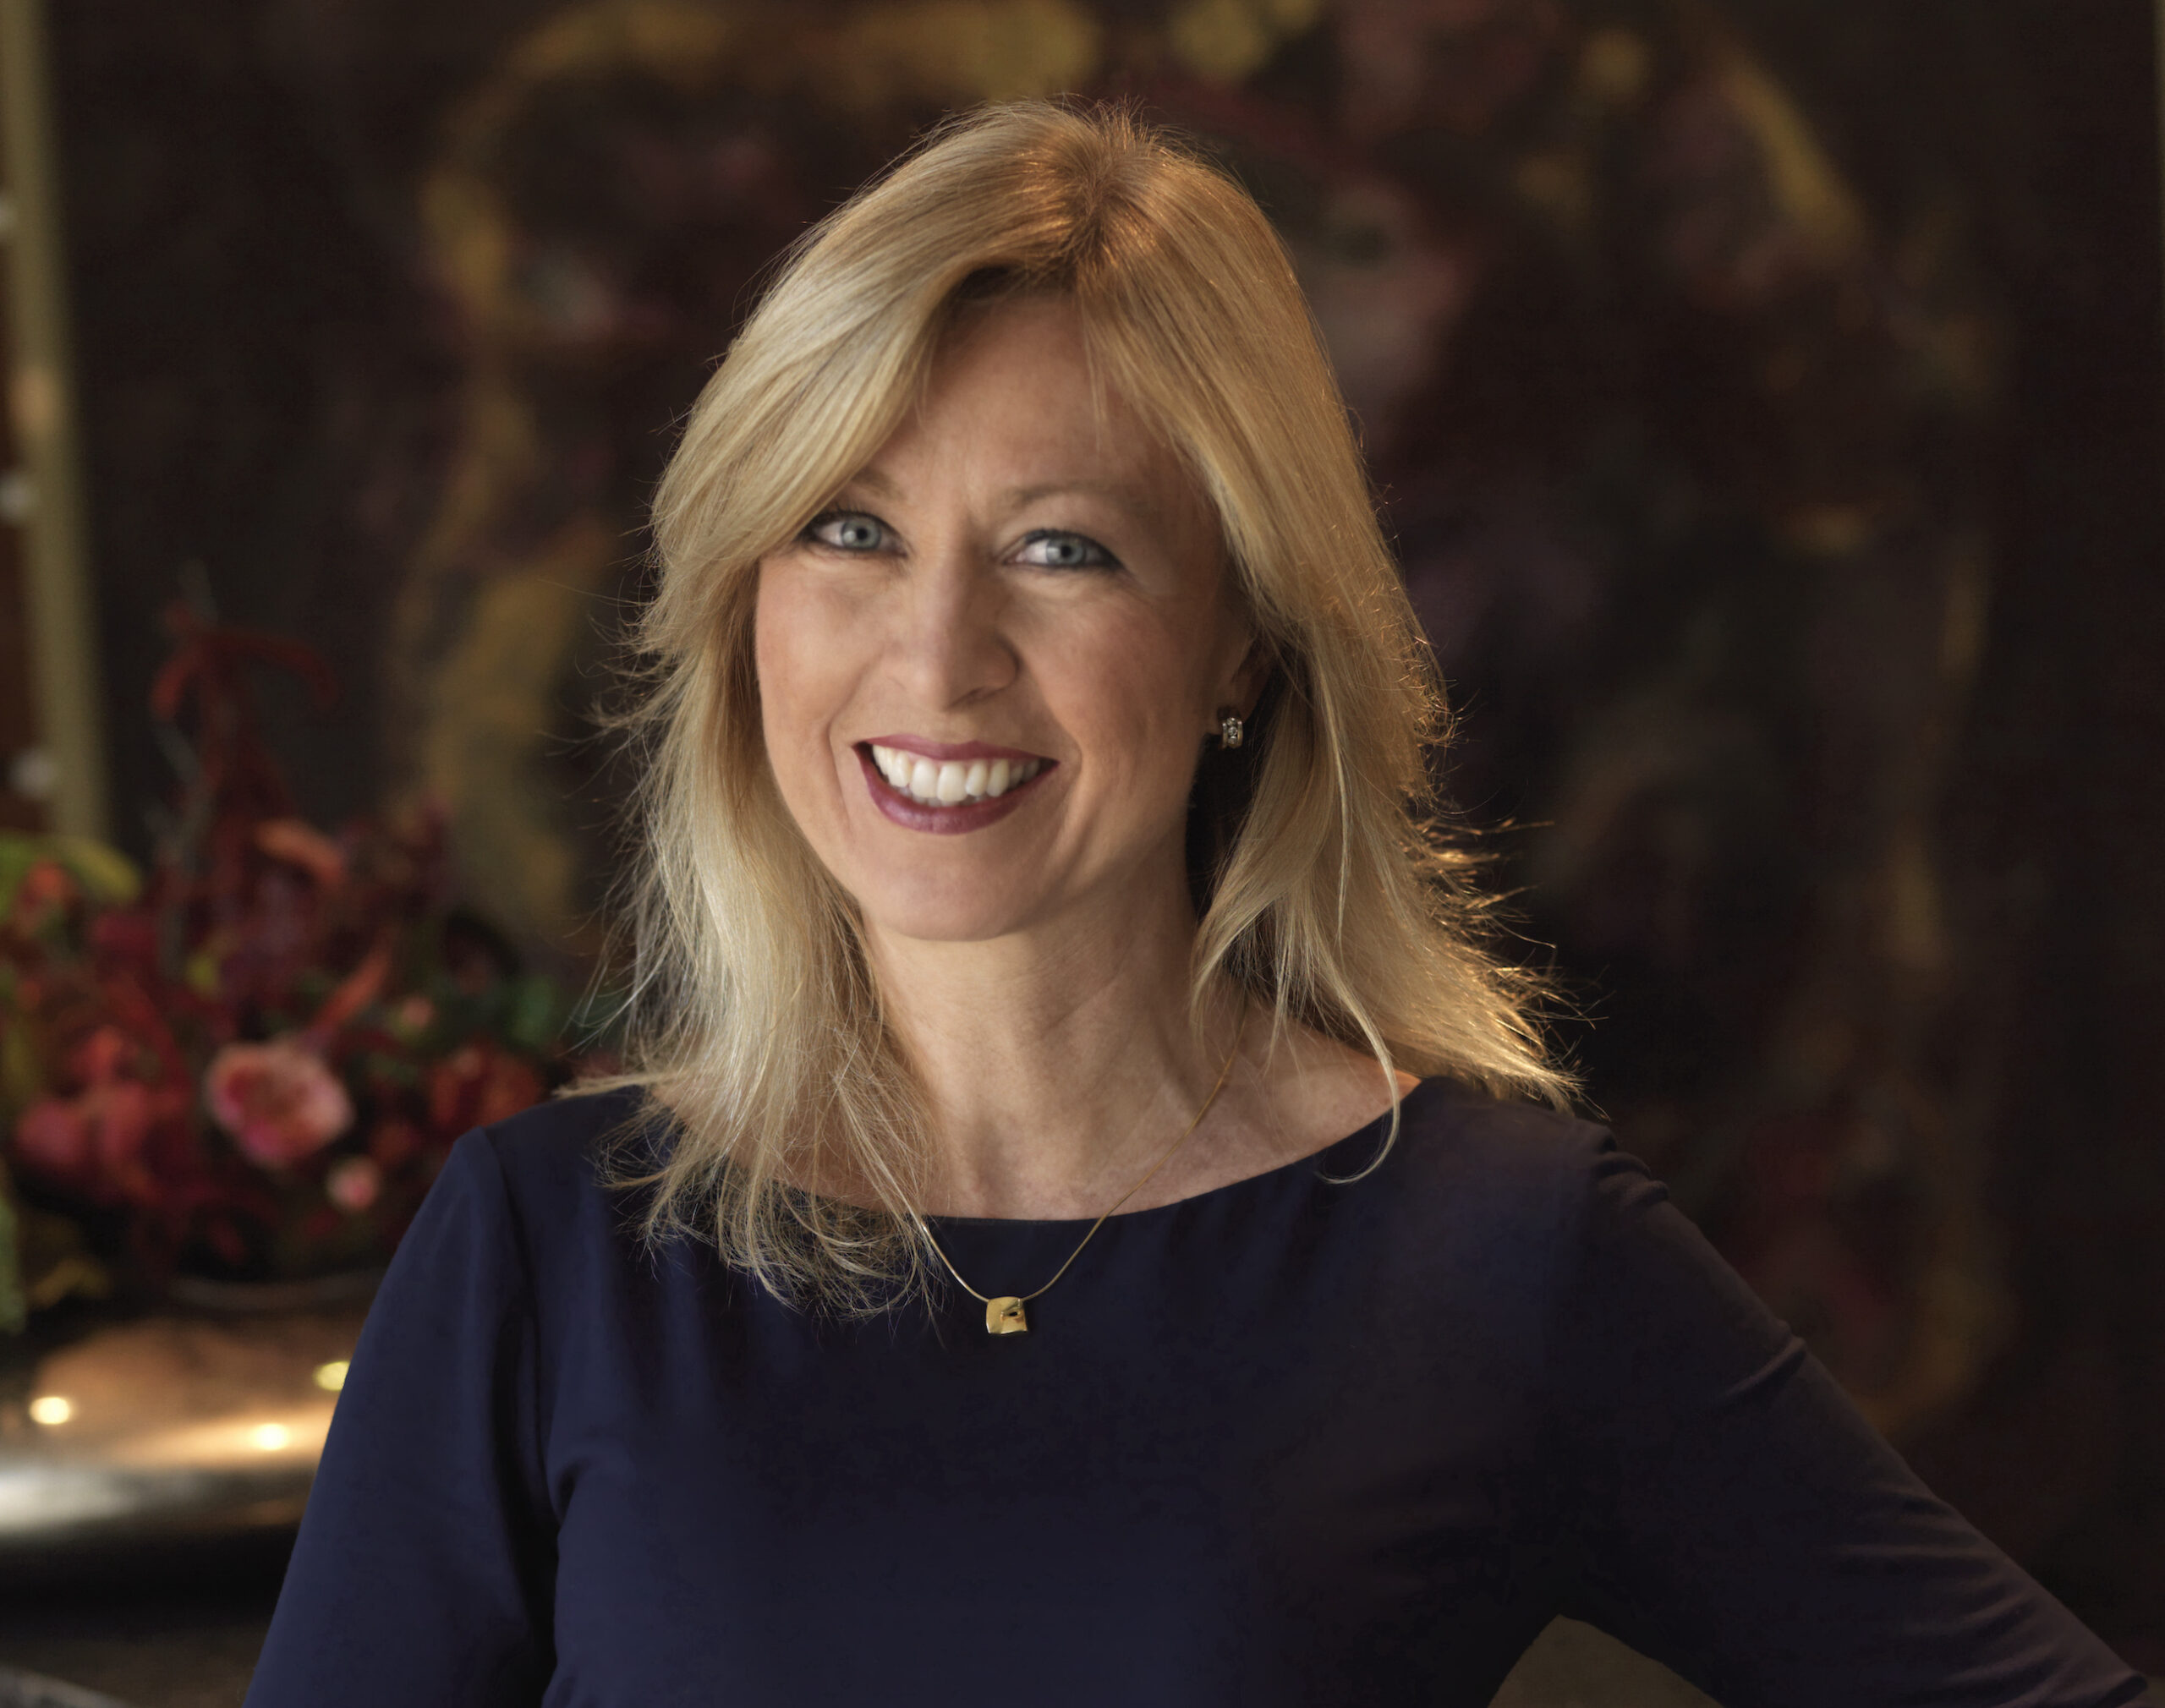 AmaWaterways' Kristin Karst Details the Luxury River Cruise Line's Brand Approach